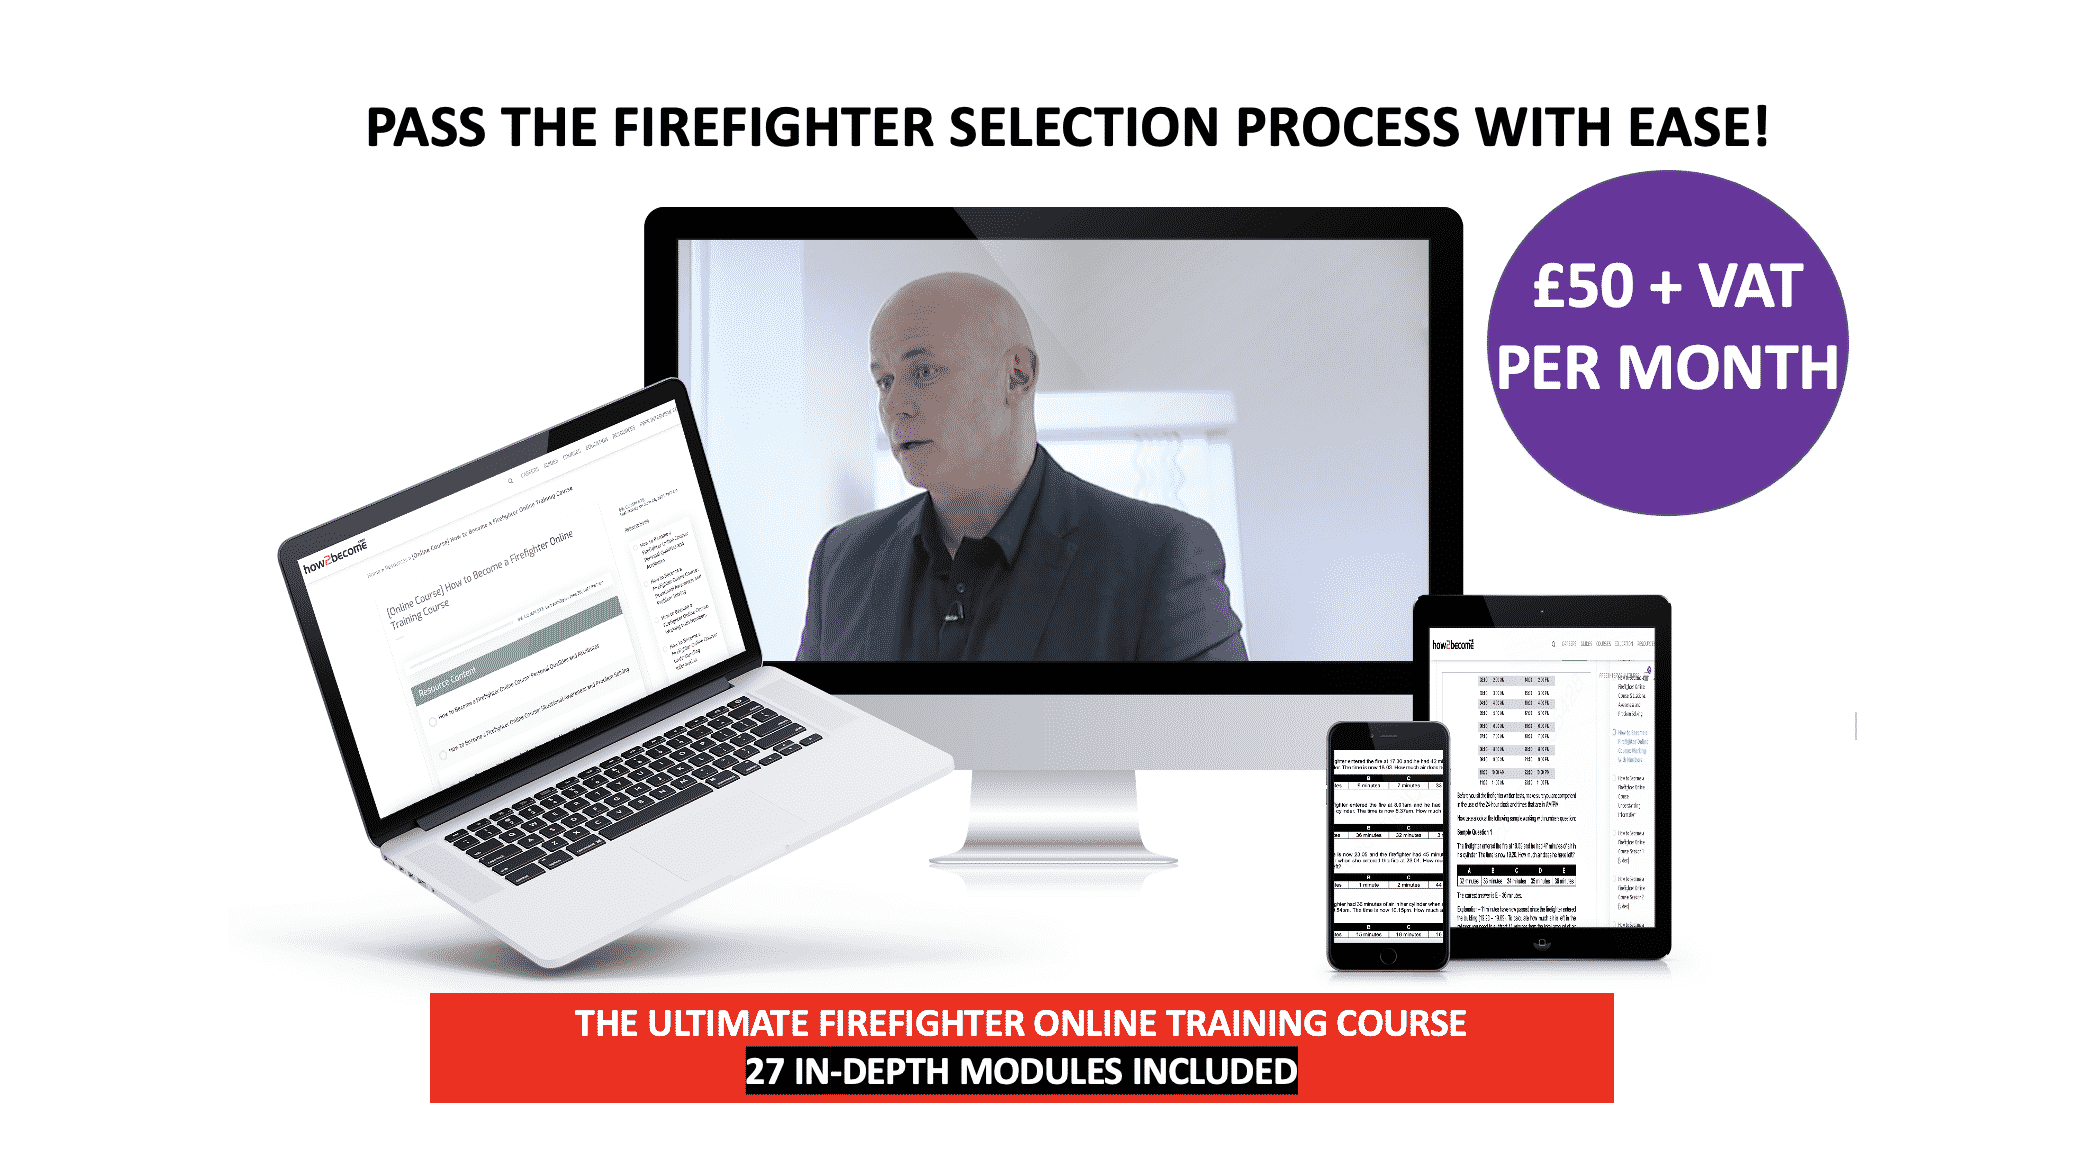 Online firefighter training course £50 per month